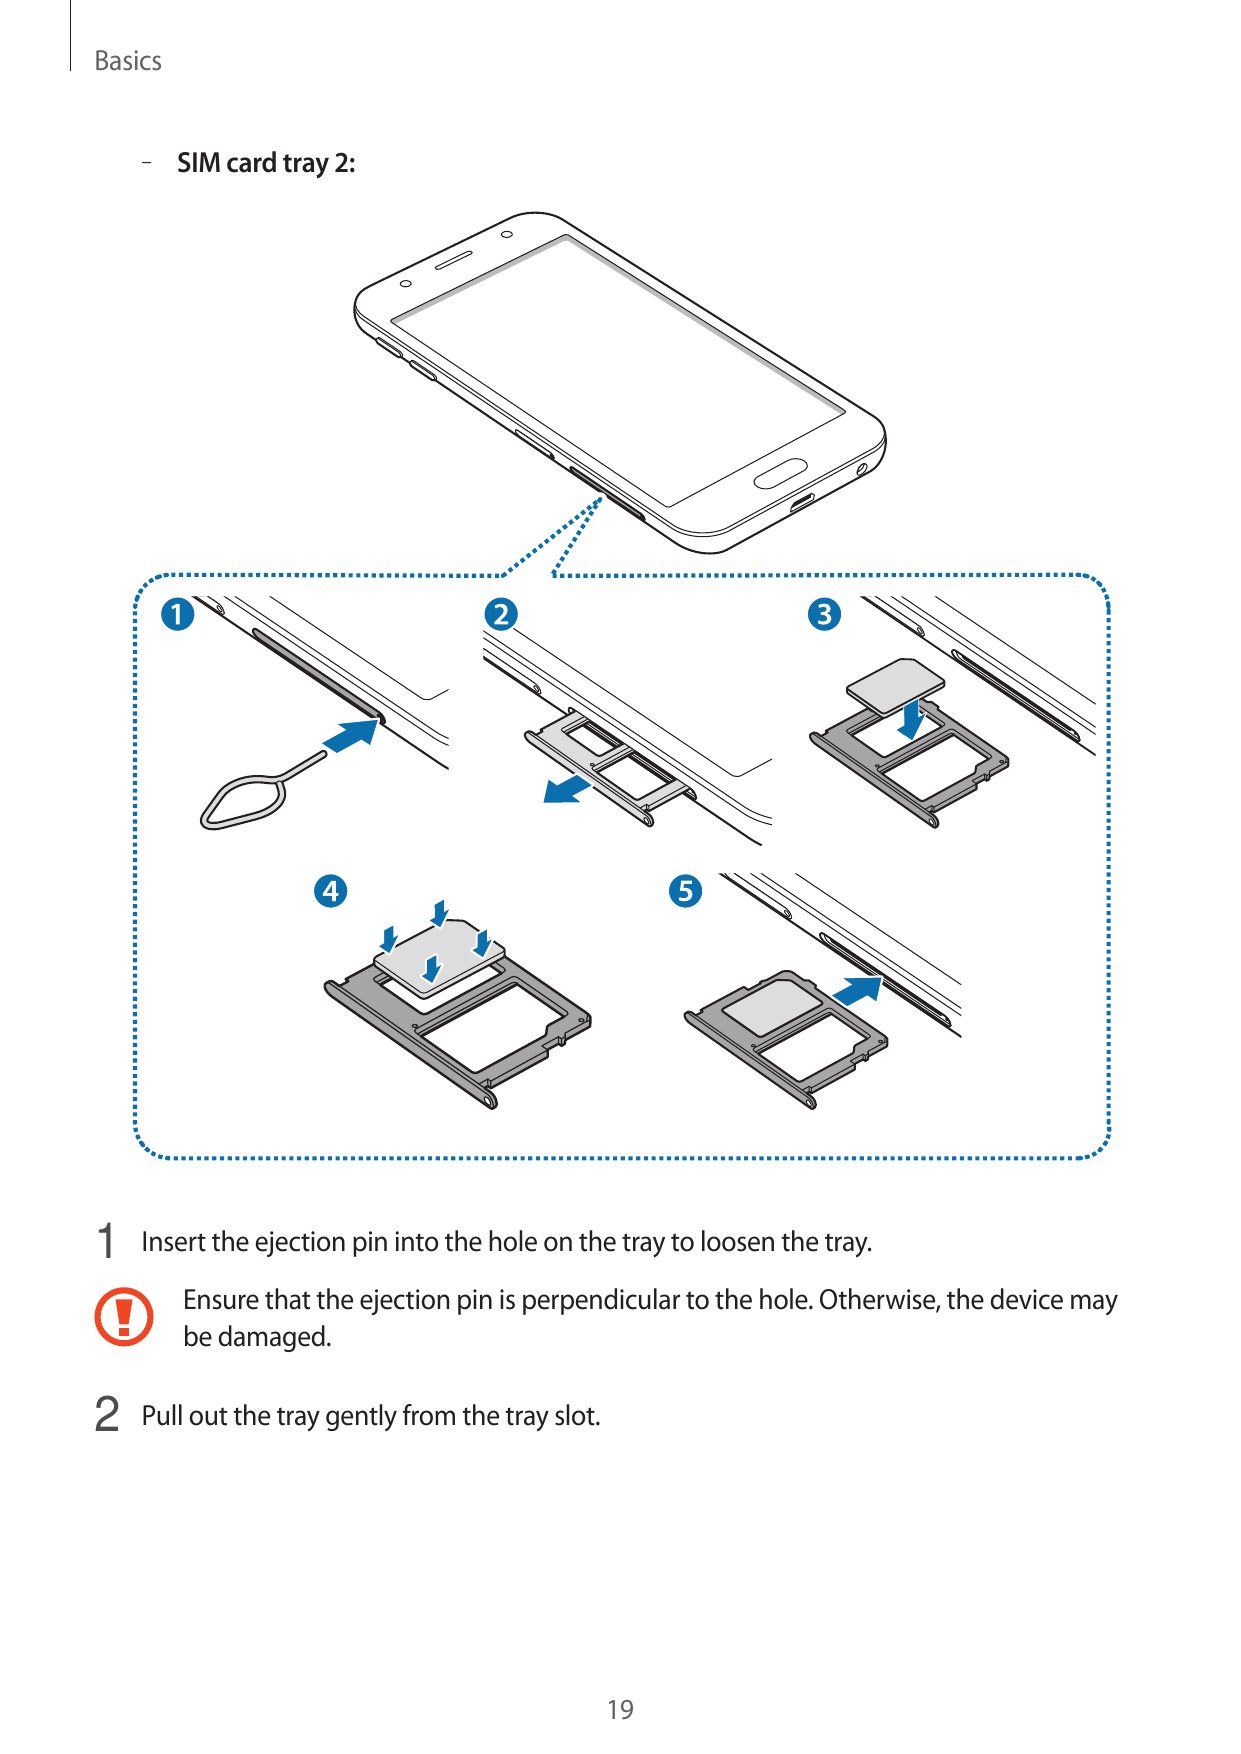 Basics– – SIM card tray 2:1 Insert the ejection pin into the hole on the tray to loosen the tray.Ensure that the ejection pin is